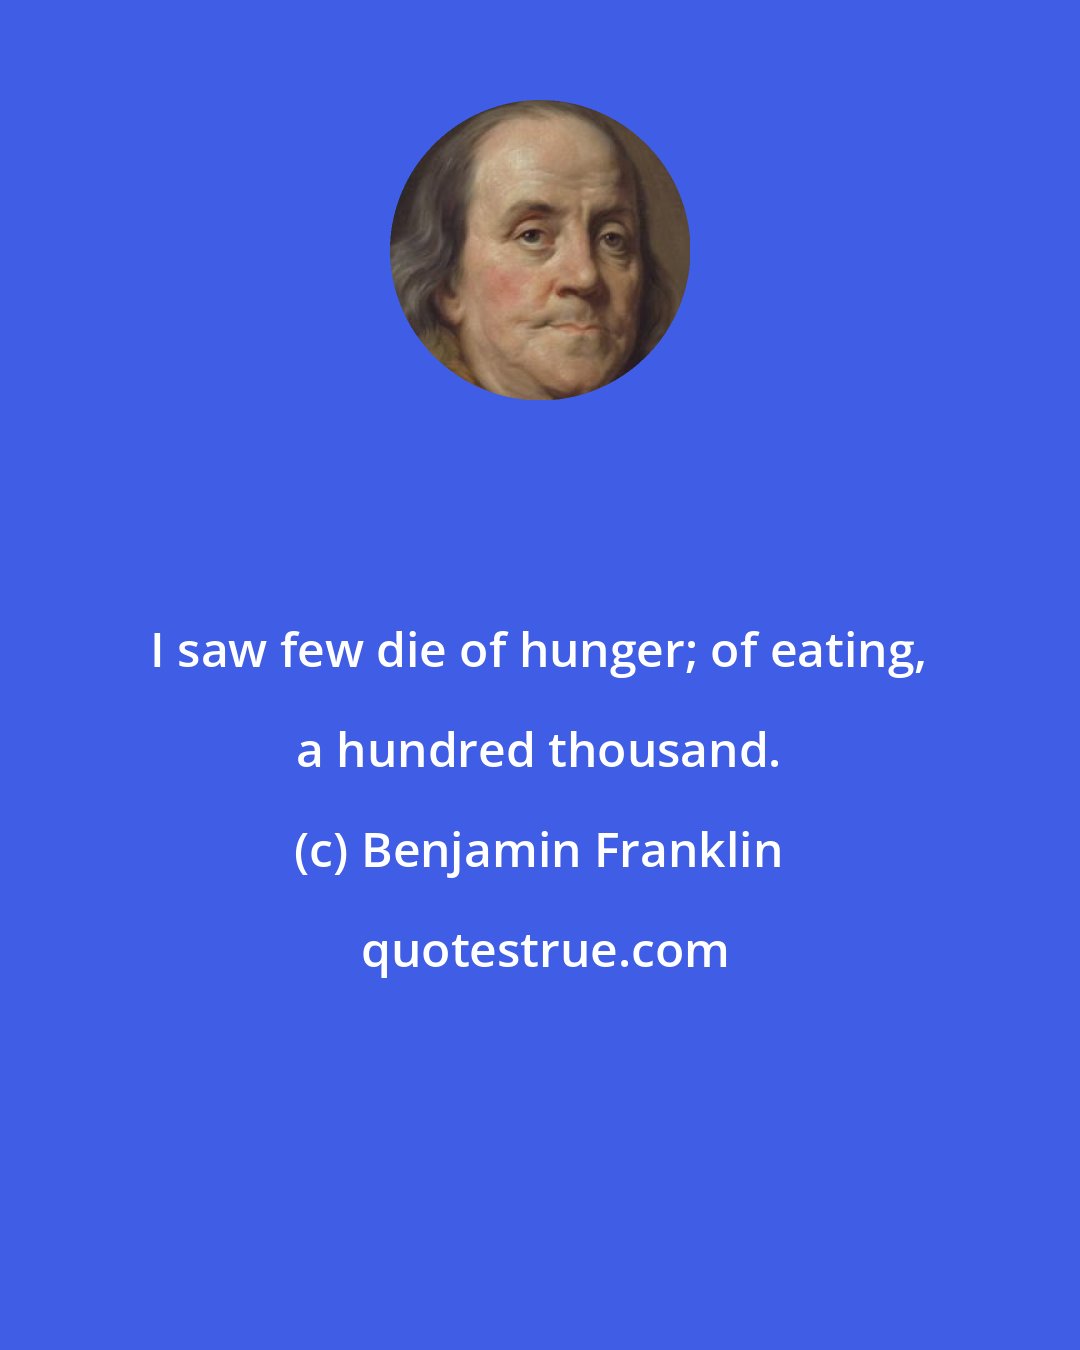 Benjamin Franklin: I saw few die of hunger; of eating, a hundred thousand.